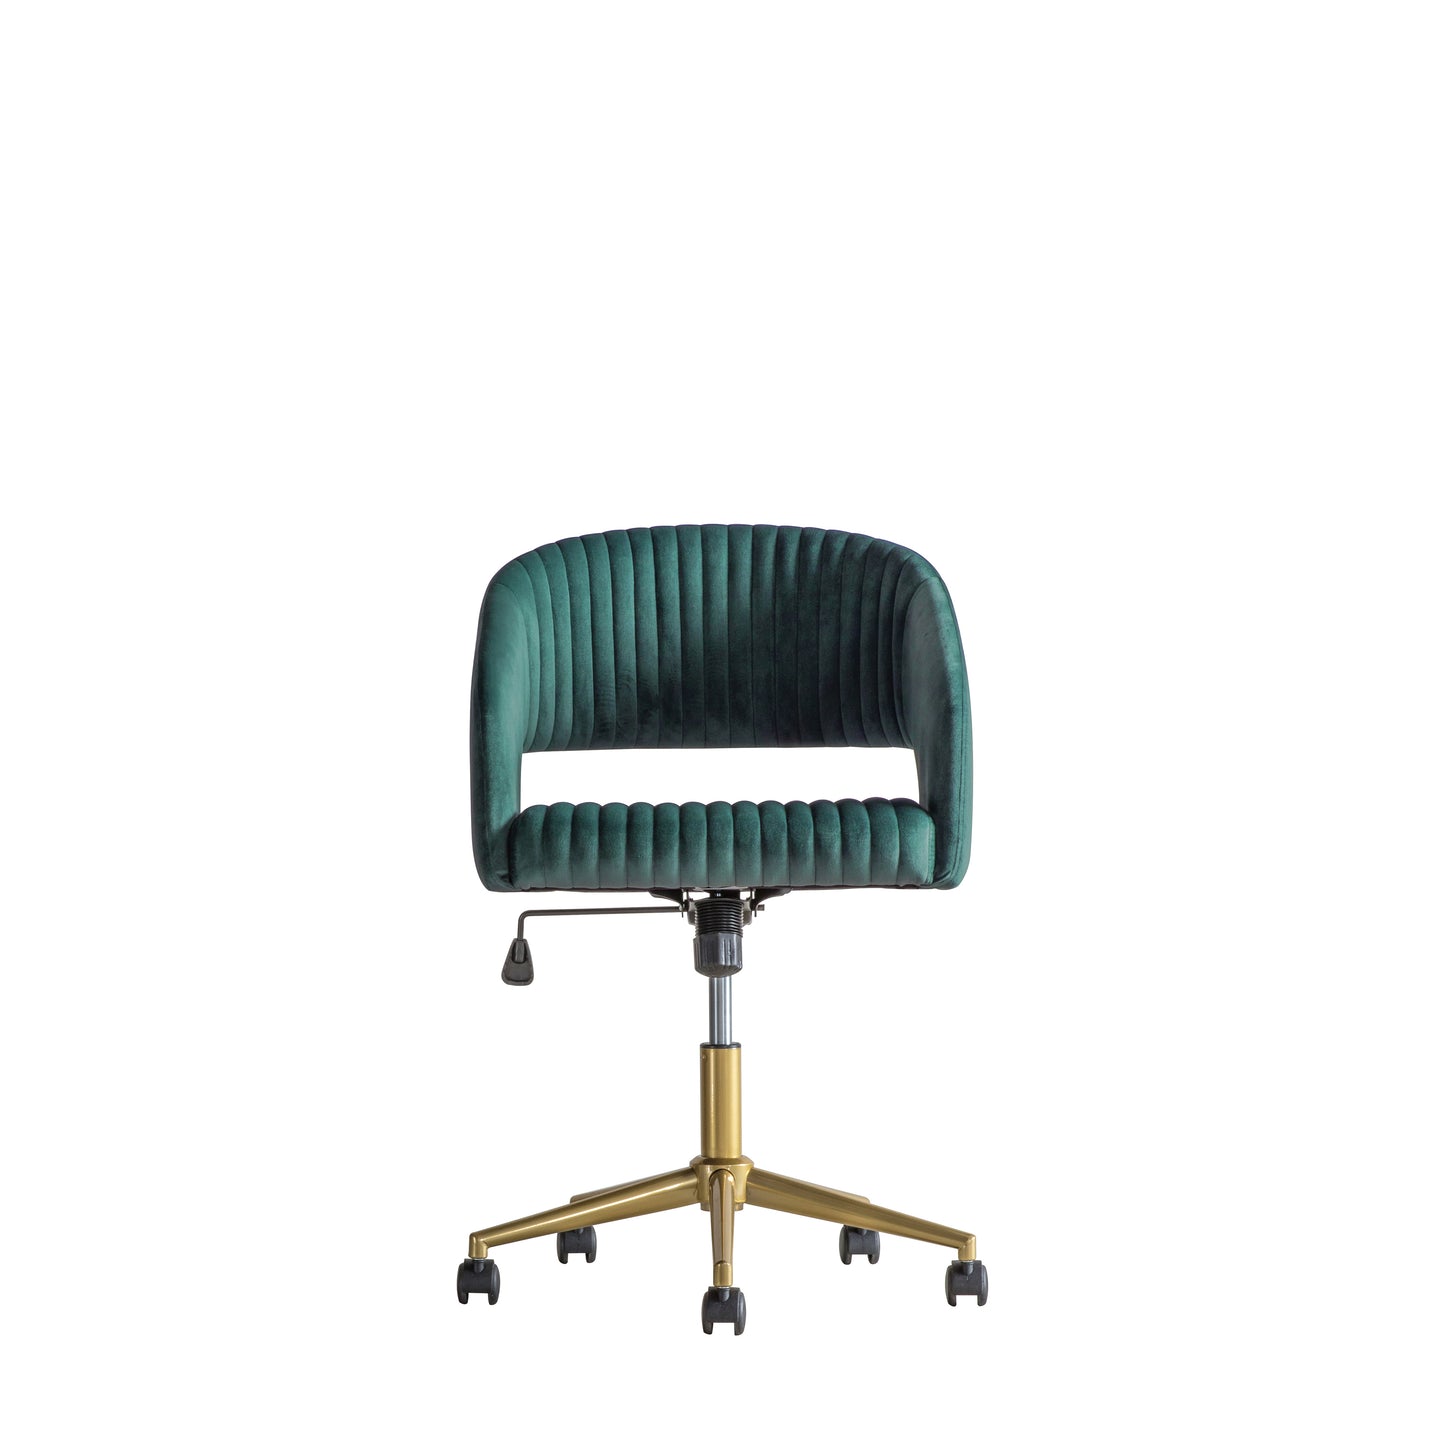 A Murray Swivel Chair Green Velvet with a green velvet upholstered seat for interior decor enthusiasts and home furniture seekers from Kikiathome.co.uk.